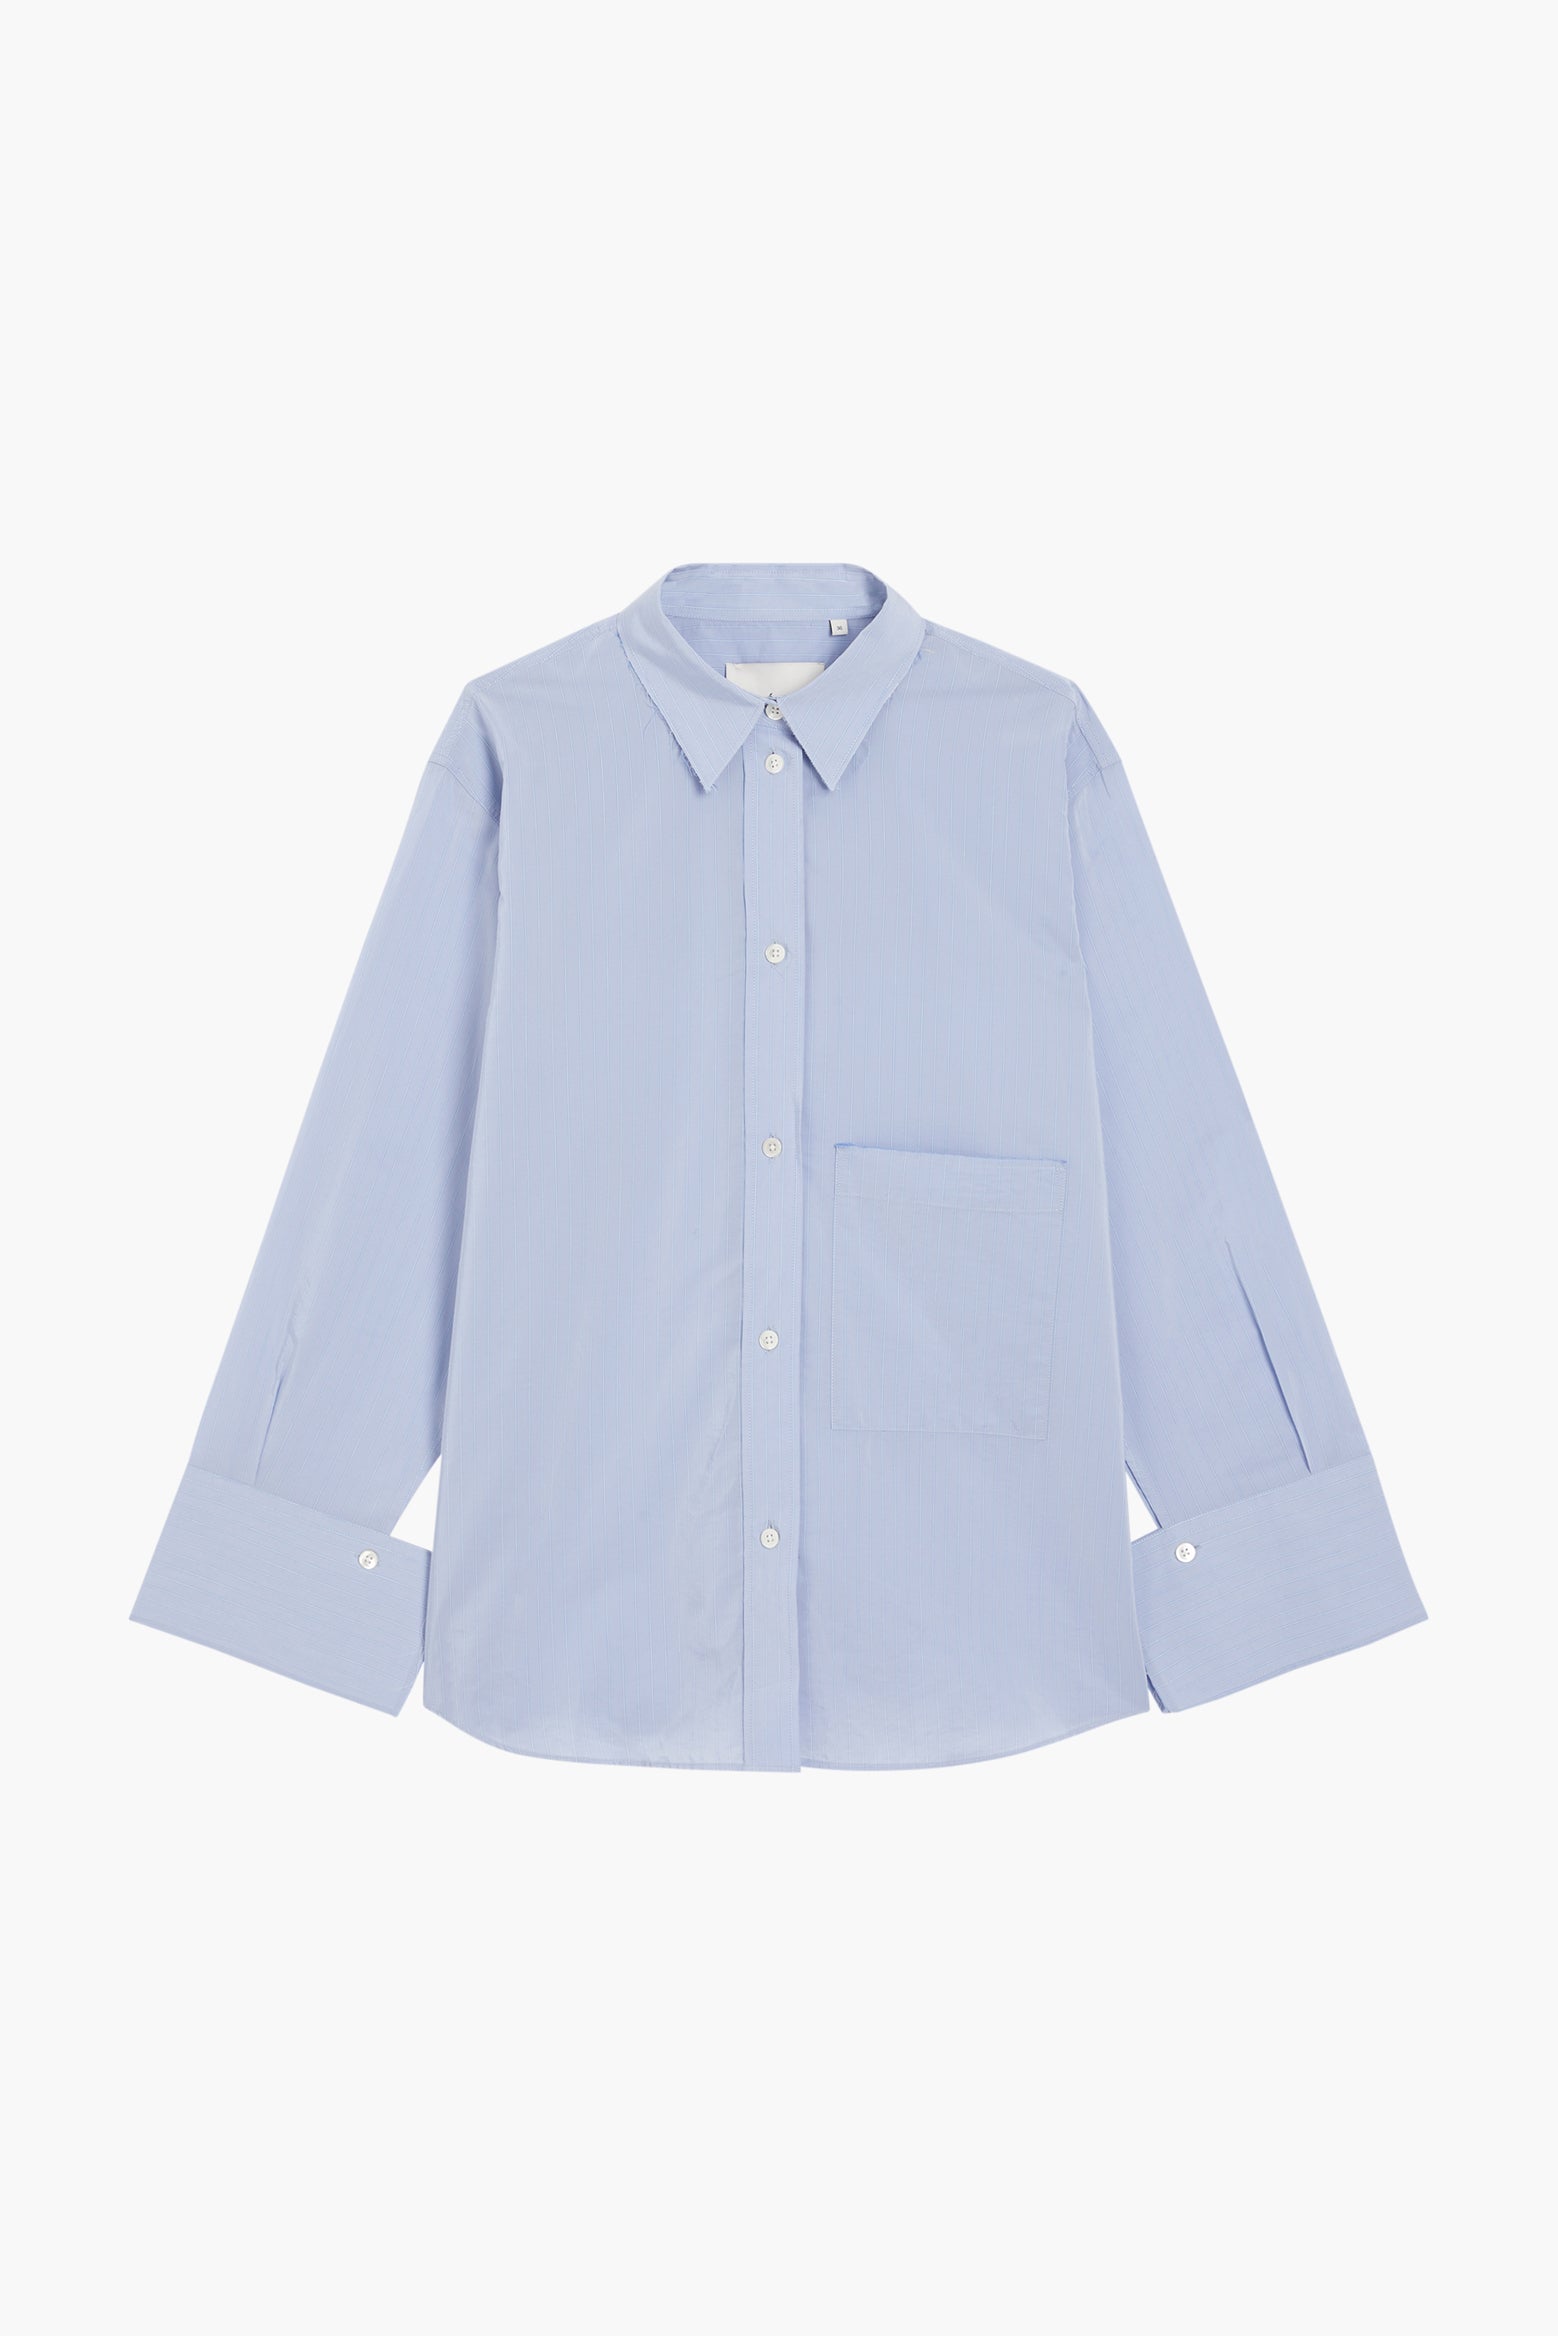 Rohe Fine Striped Shirt in Light Blue available at TNT The New Trend Australia